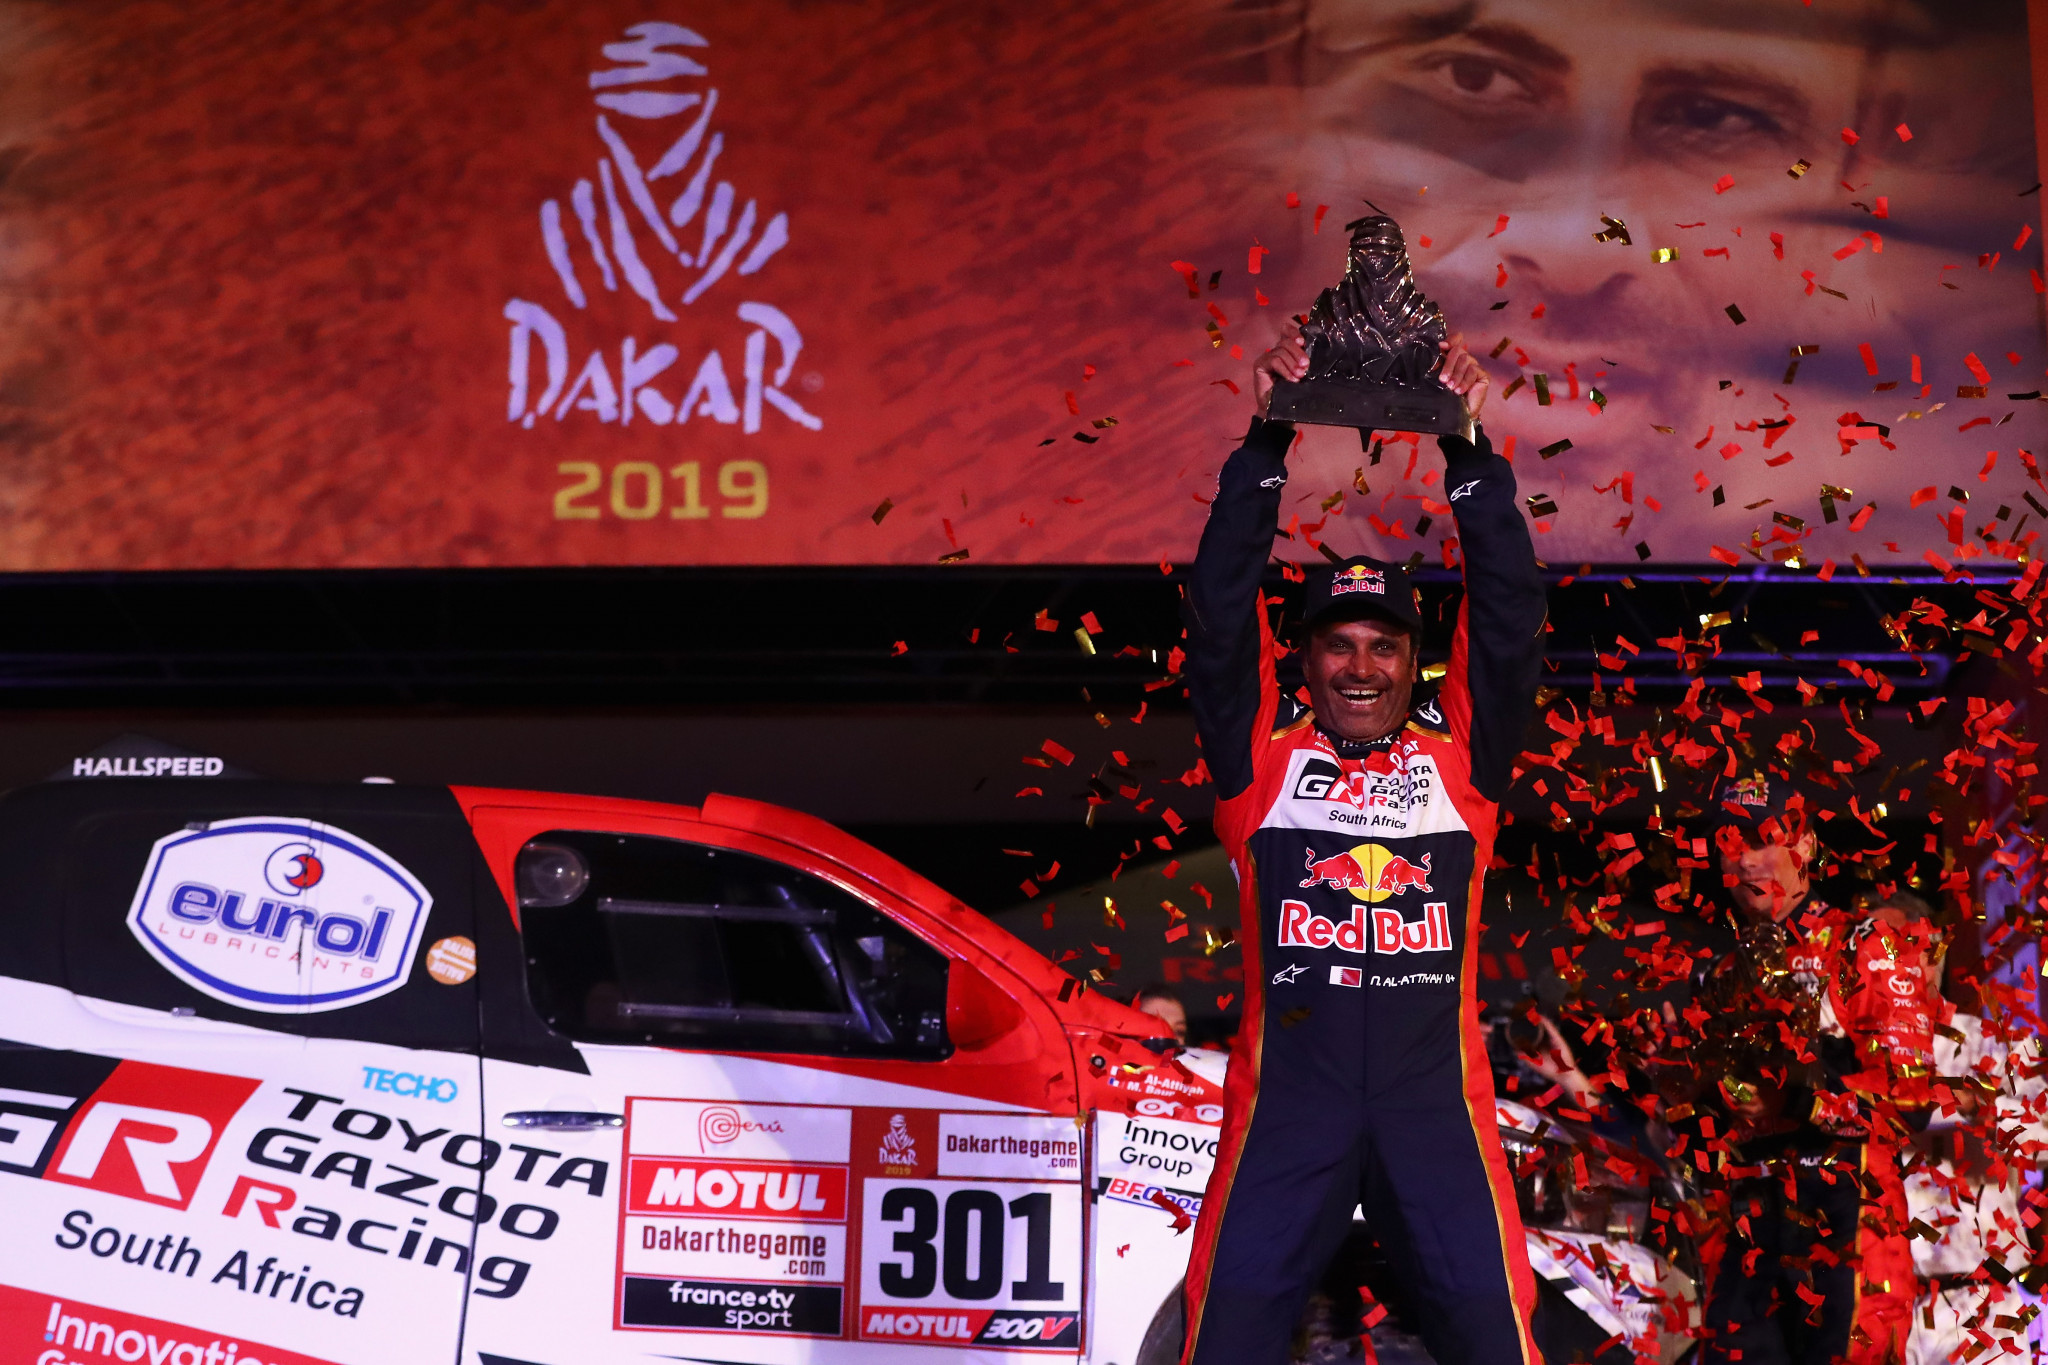 Dakar Rally champion targeting seventh Olympic appearance at Tokyo 2020